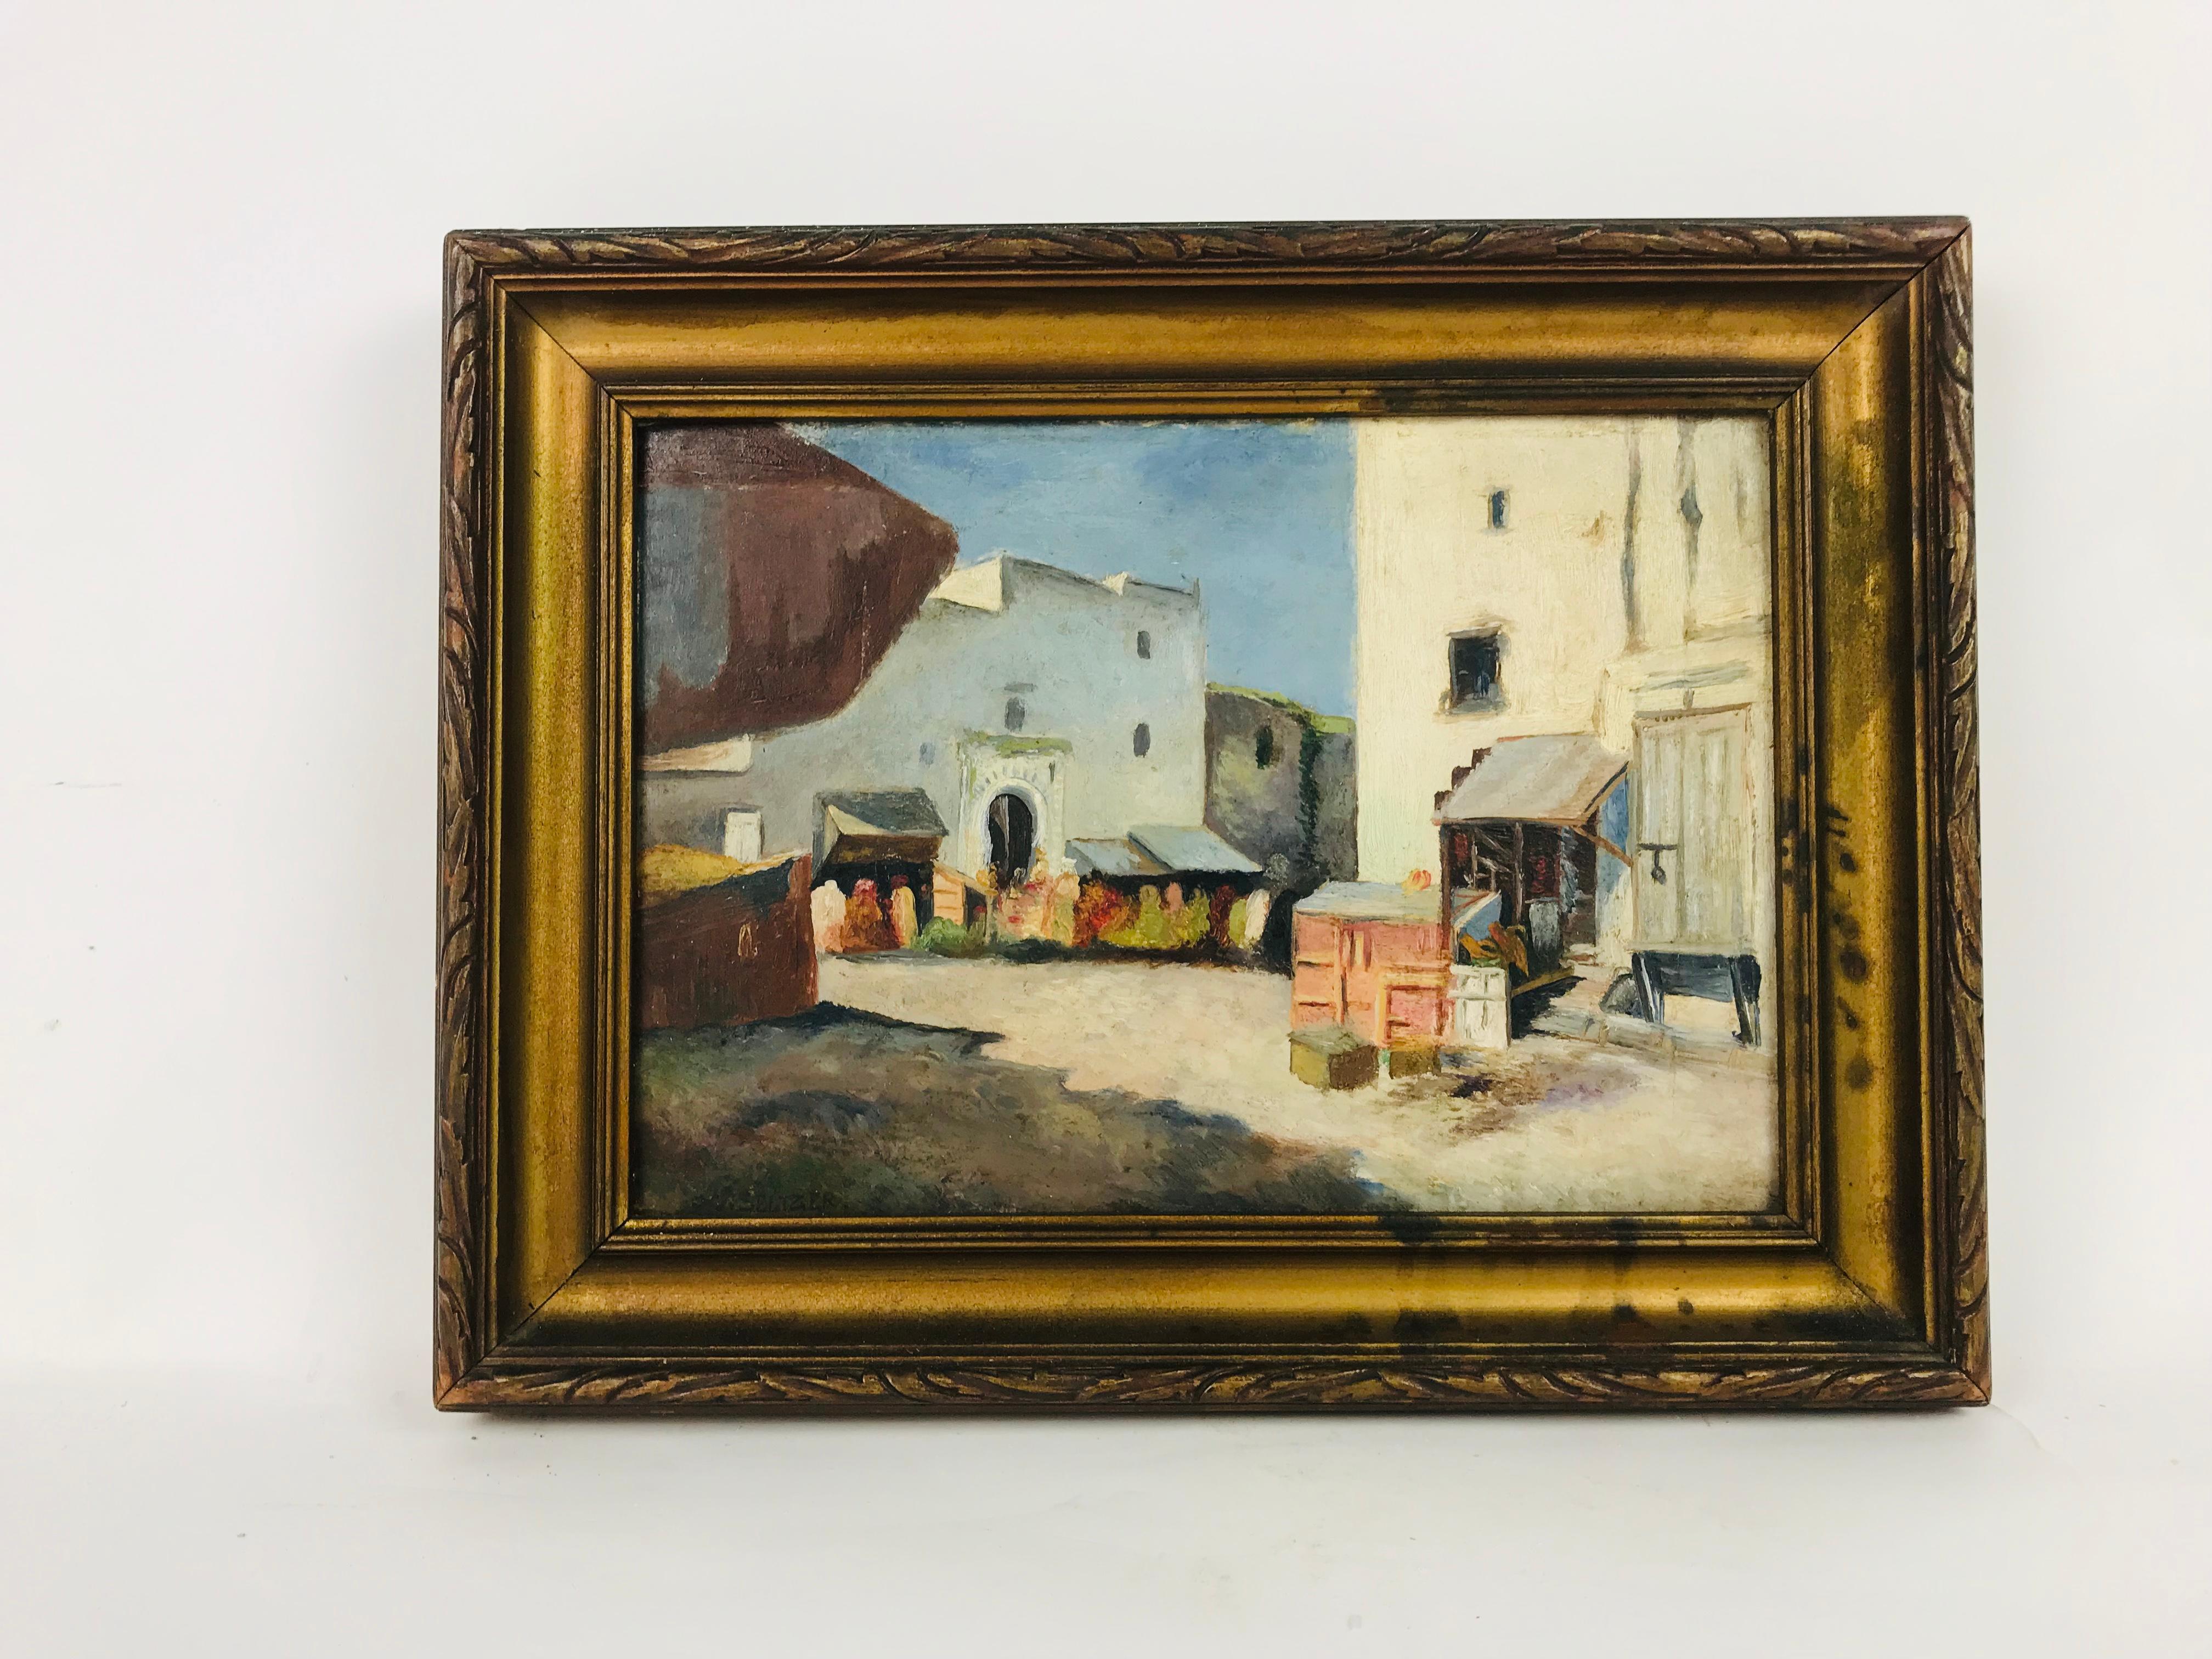 A wonderful summer day in this Pueblo Town, perfectly captured in this oil on board by listed artist, Olaf Carl Seltzer (1877-1957). A delightful day that never turns to night, never sees rain, just a flawless day that last forever. The artist has